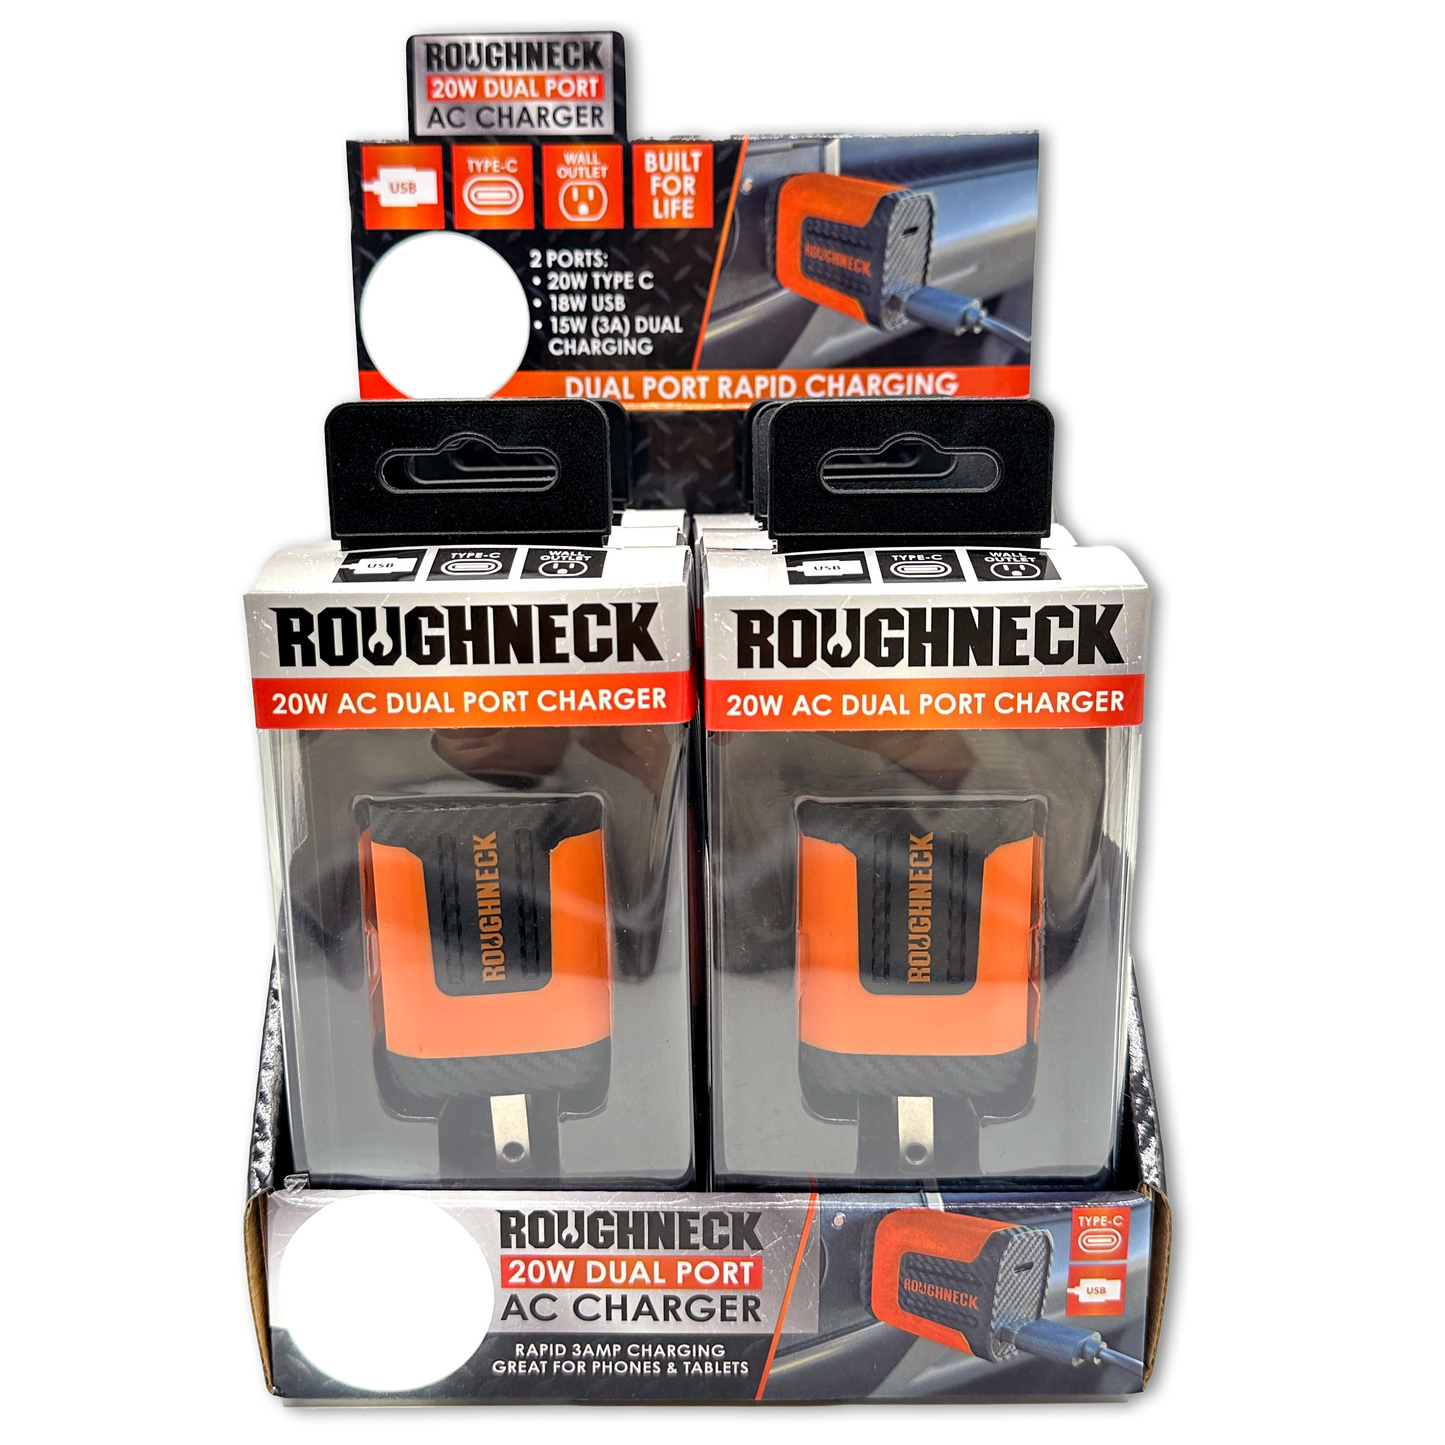 ITEM NUMBER 023689 ROUGHNECK AC CHARGER 6 PIECES PER DISPLAY